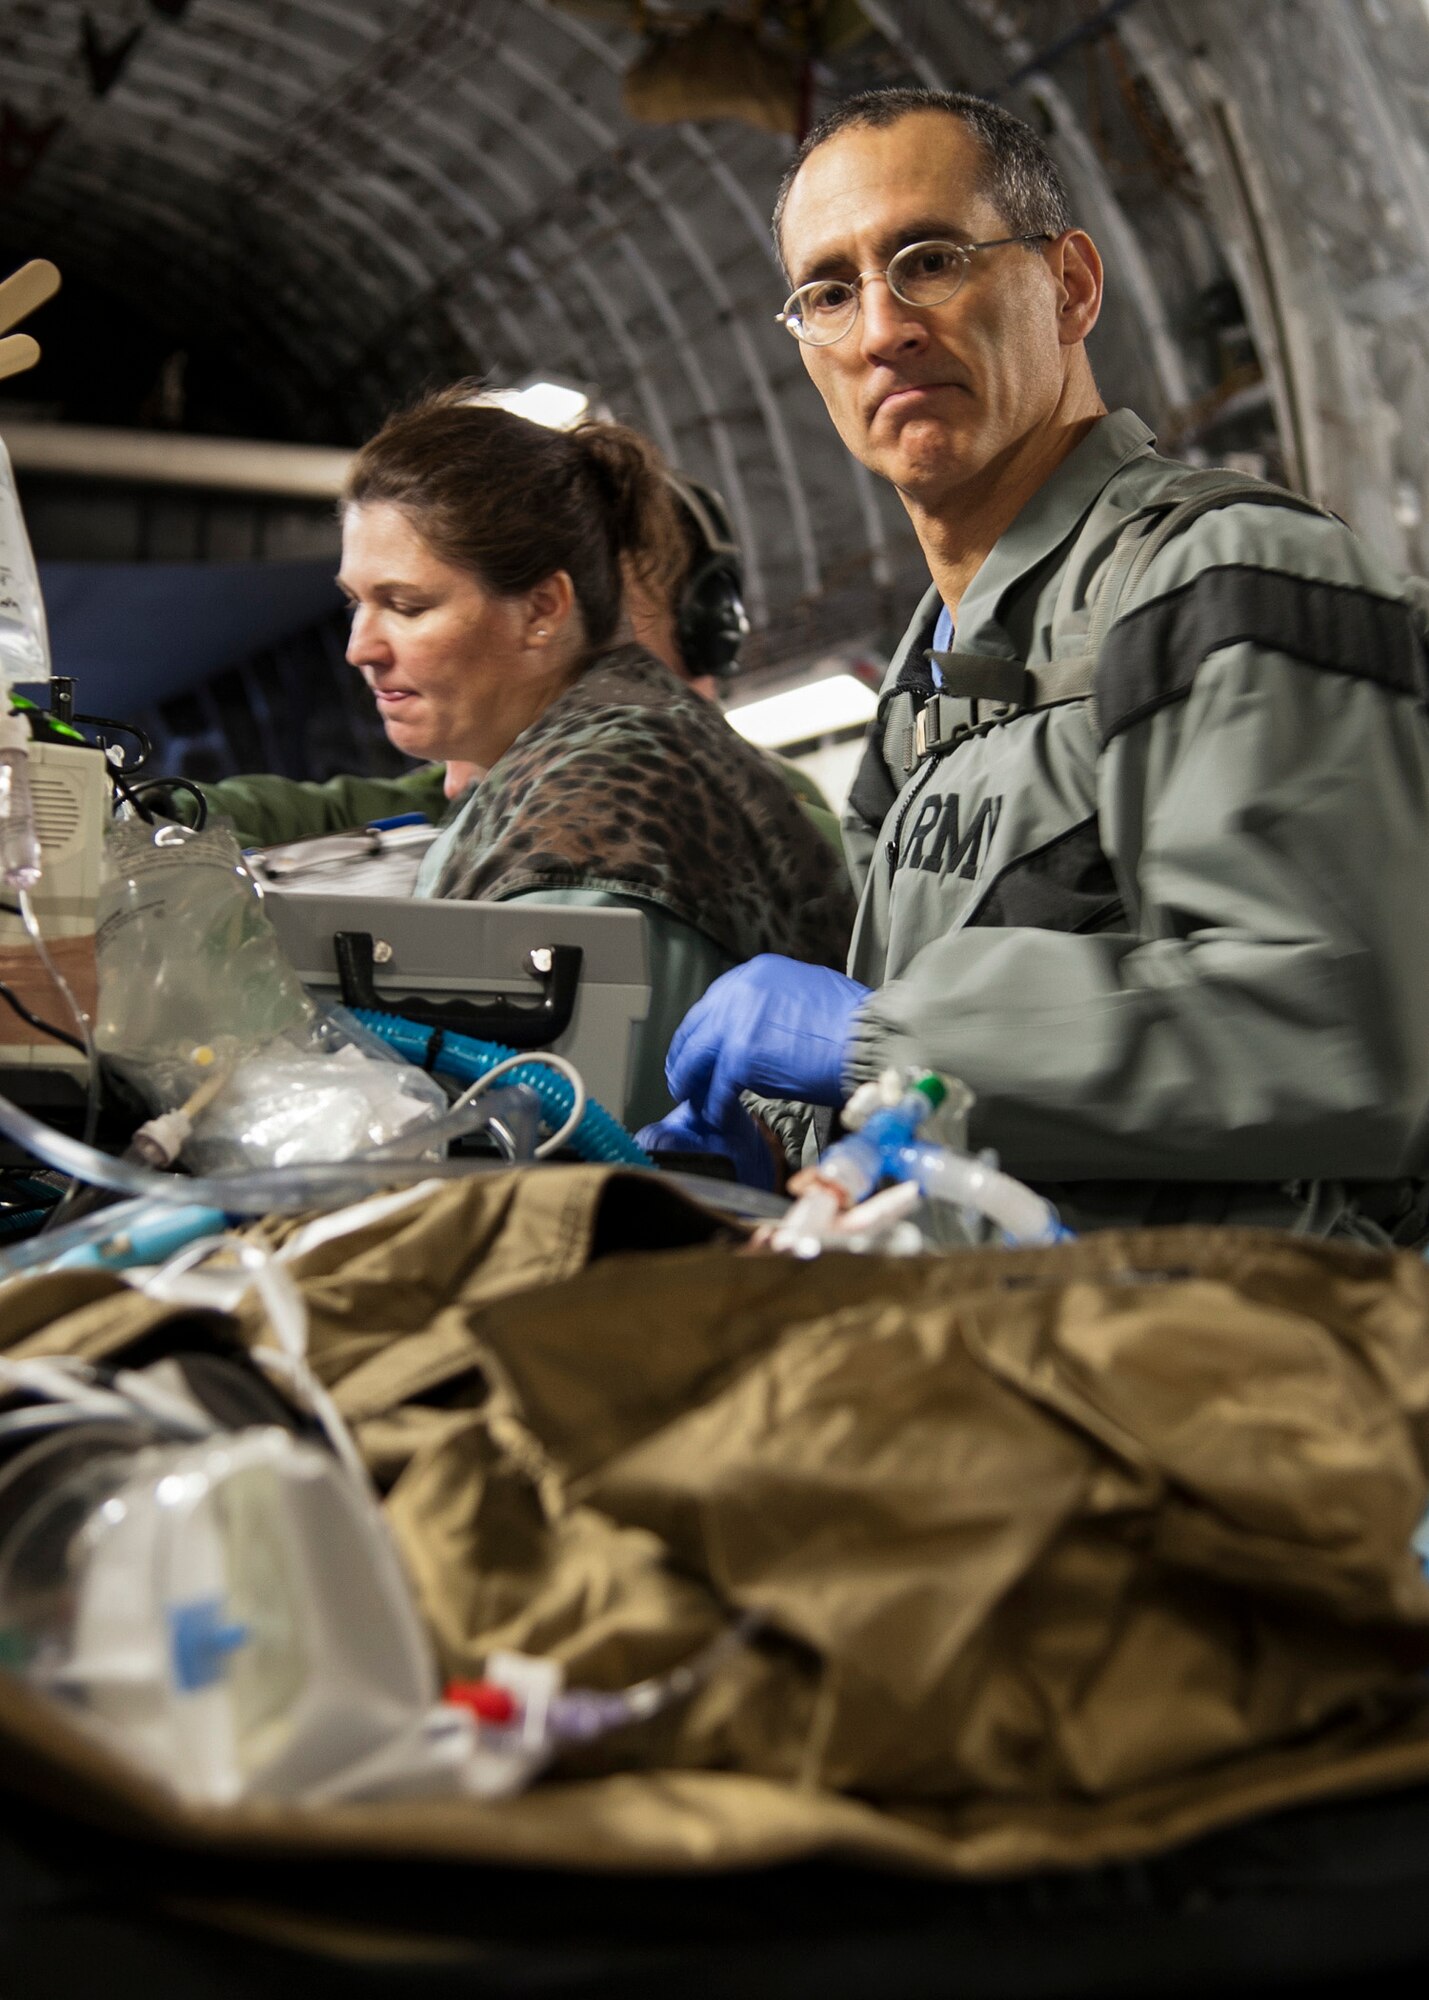 U.S. Air Force Lt. Col. (Dr.) Jeremy Cannon treats an extracorporeal membrane oxygenation patient on a C-17 Globemaster III, Jan. 16, Joint Base San Antonio-Lackland, Texas. The patient was the first to be air-transferred on an ECMO machine this year. (U.S. Air Force photo/Staff Sgt. Kevin Iinuma)